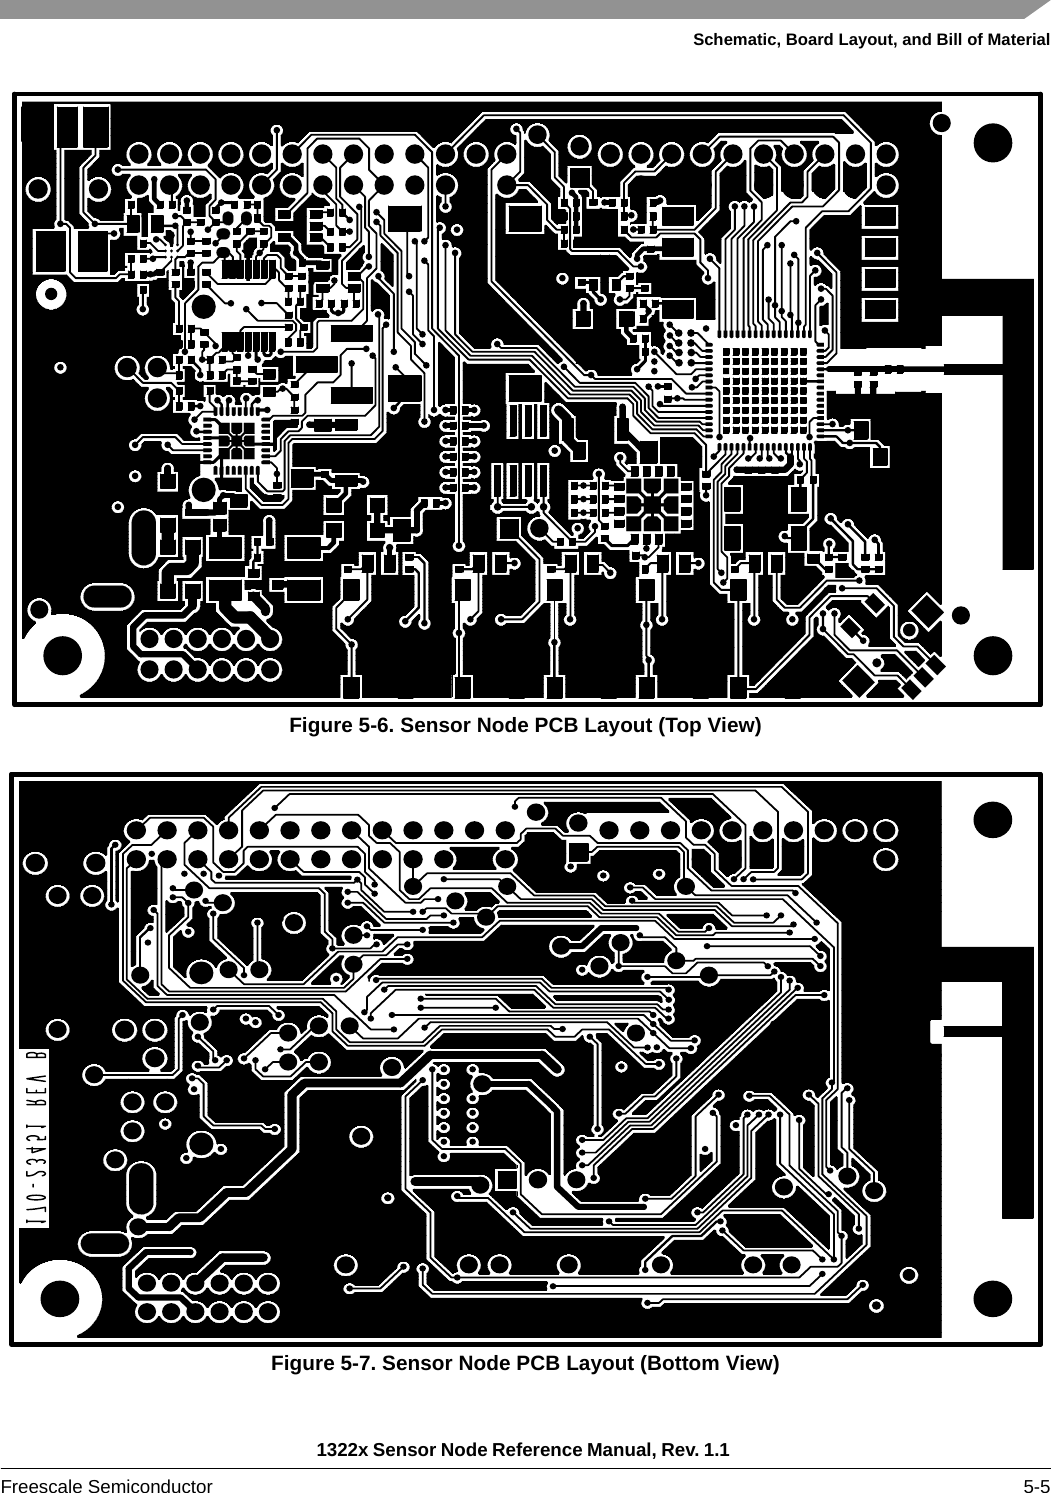 Schematic, Board Layout, and Bill of Material1322x Sensor Node Reference Manual, Rev. 1.1 Freescale Semiconductor 5-5Figure 5-6. Sensor Node PCB Layout (Top View)Figure 5-7. Sensor Node PCB Layout (Bottom View)